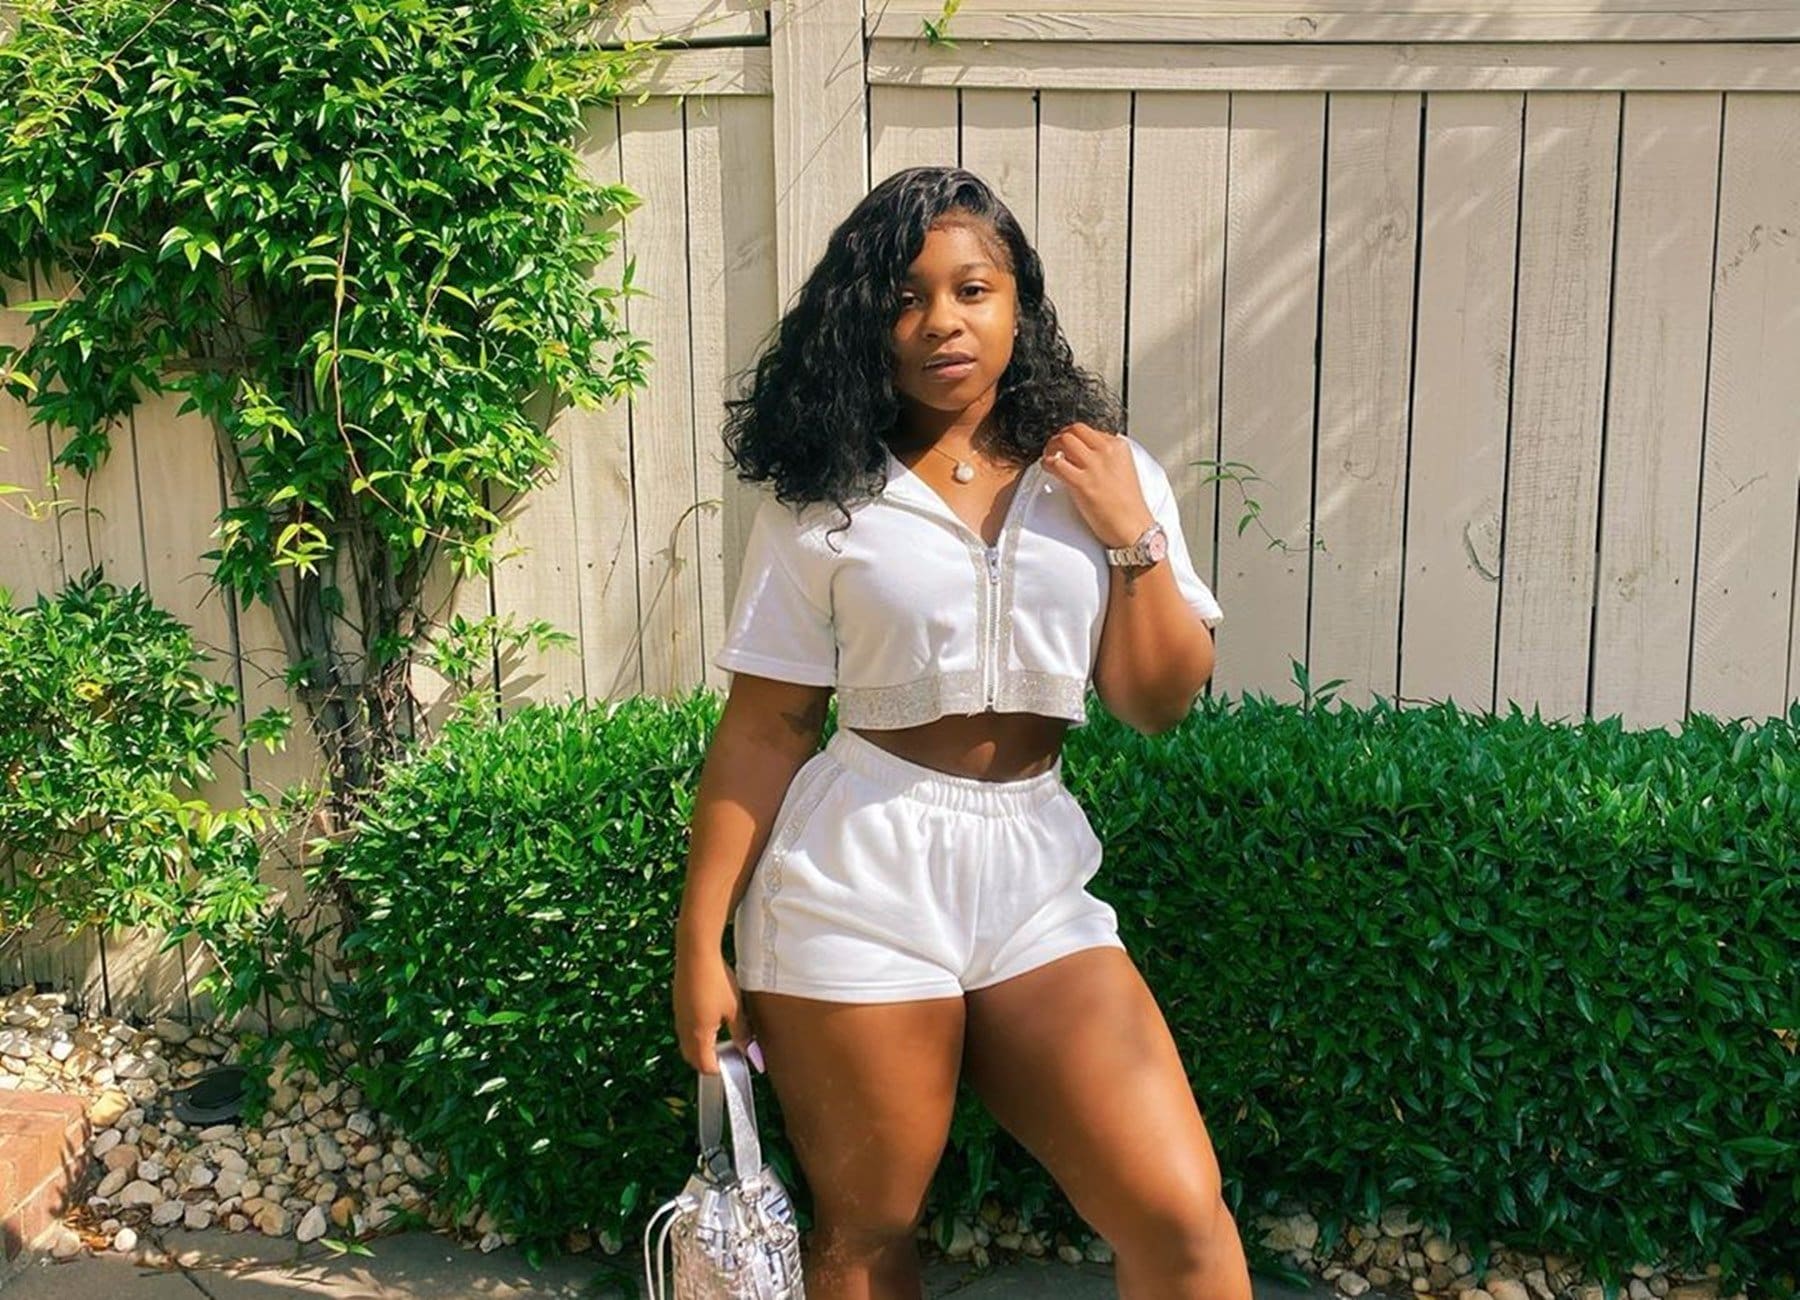 Reginae Carter Surprises Fans With This 3-Day Virtual Event Featuring Toya Johnson, Anisha And Ms. Anita Johnson - See The Details!